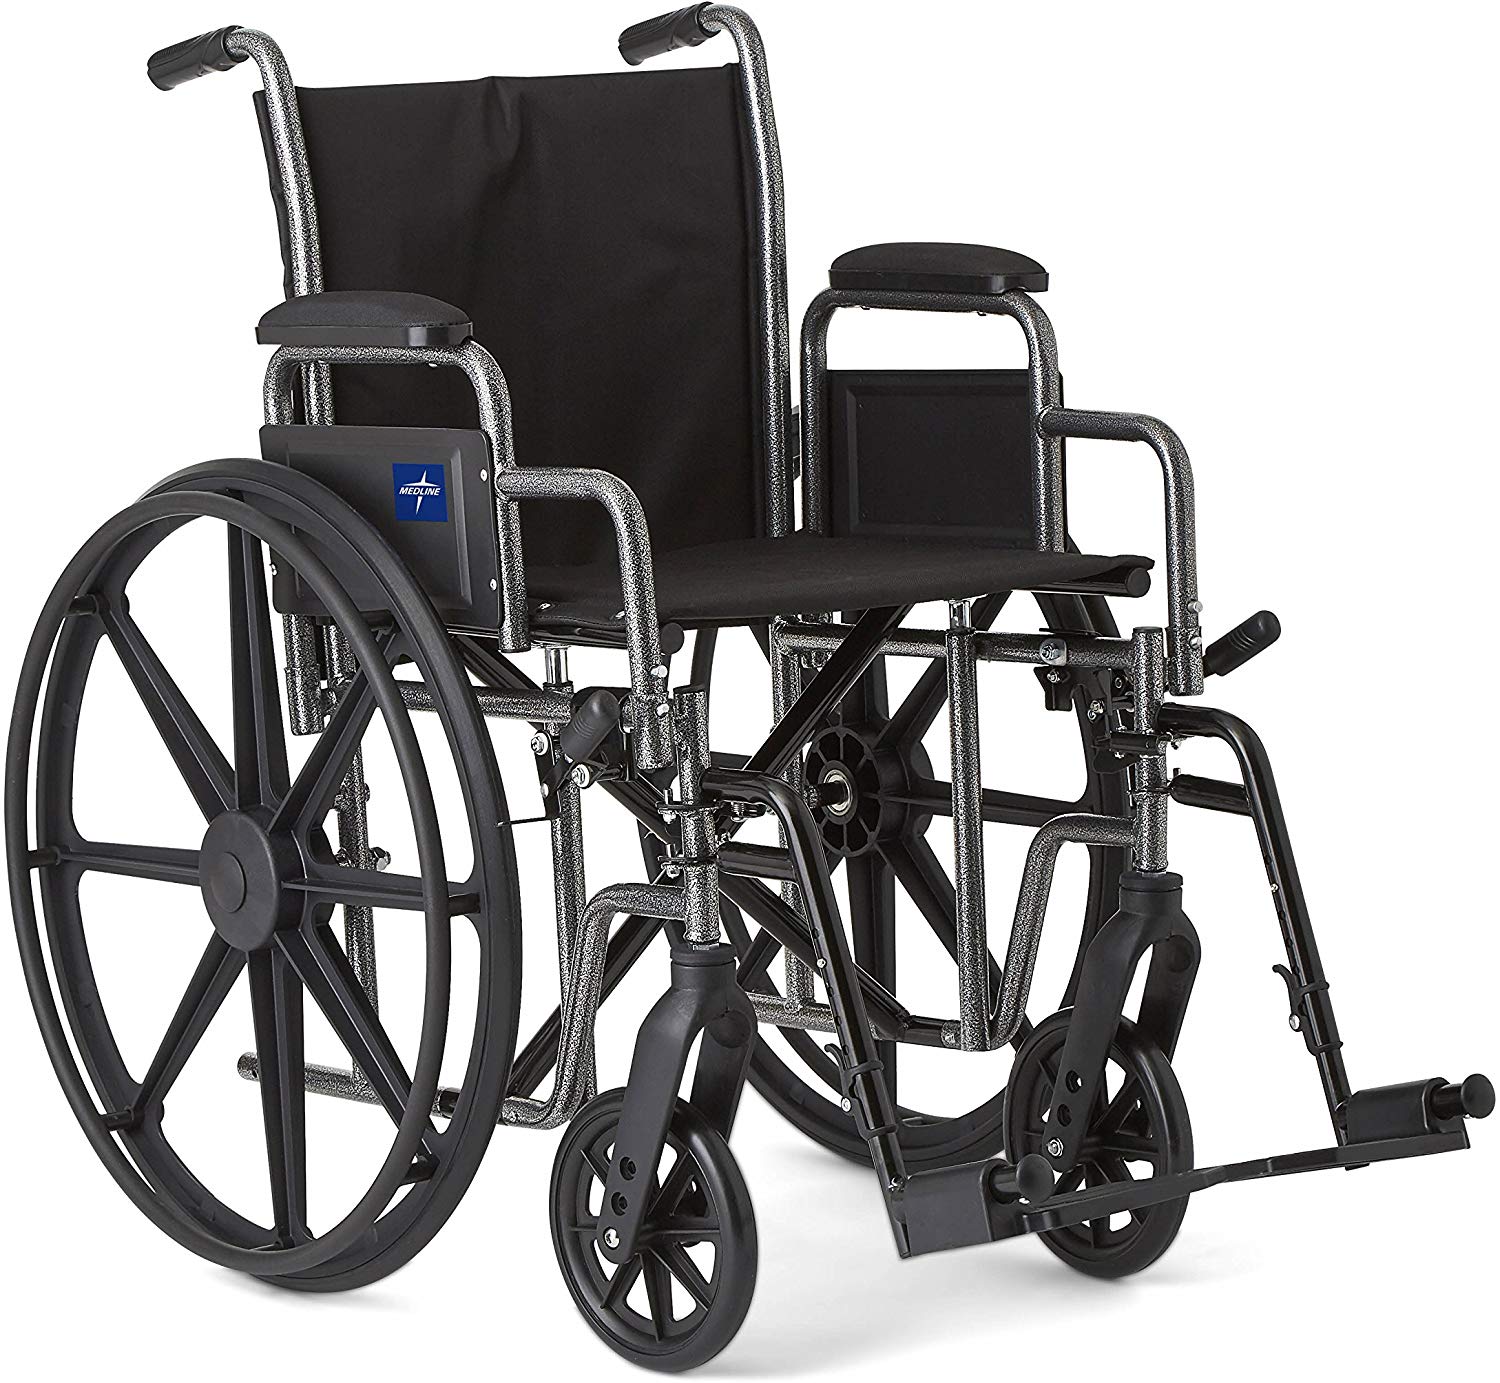 Medline Excel K1 Standard Wheelchair with Desk Length Armrests and Swing away Legrests, Basic Strong and Sturdy, 18" Seat Width - image 1 of 7